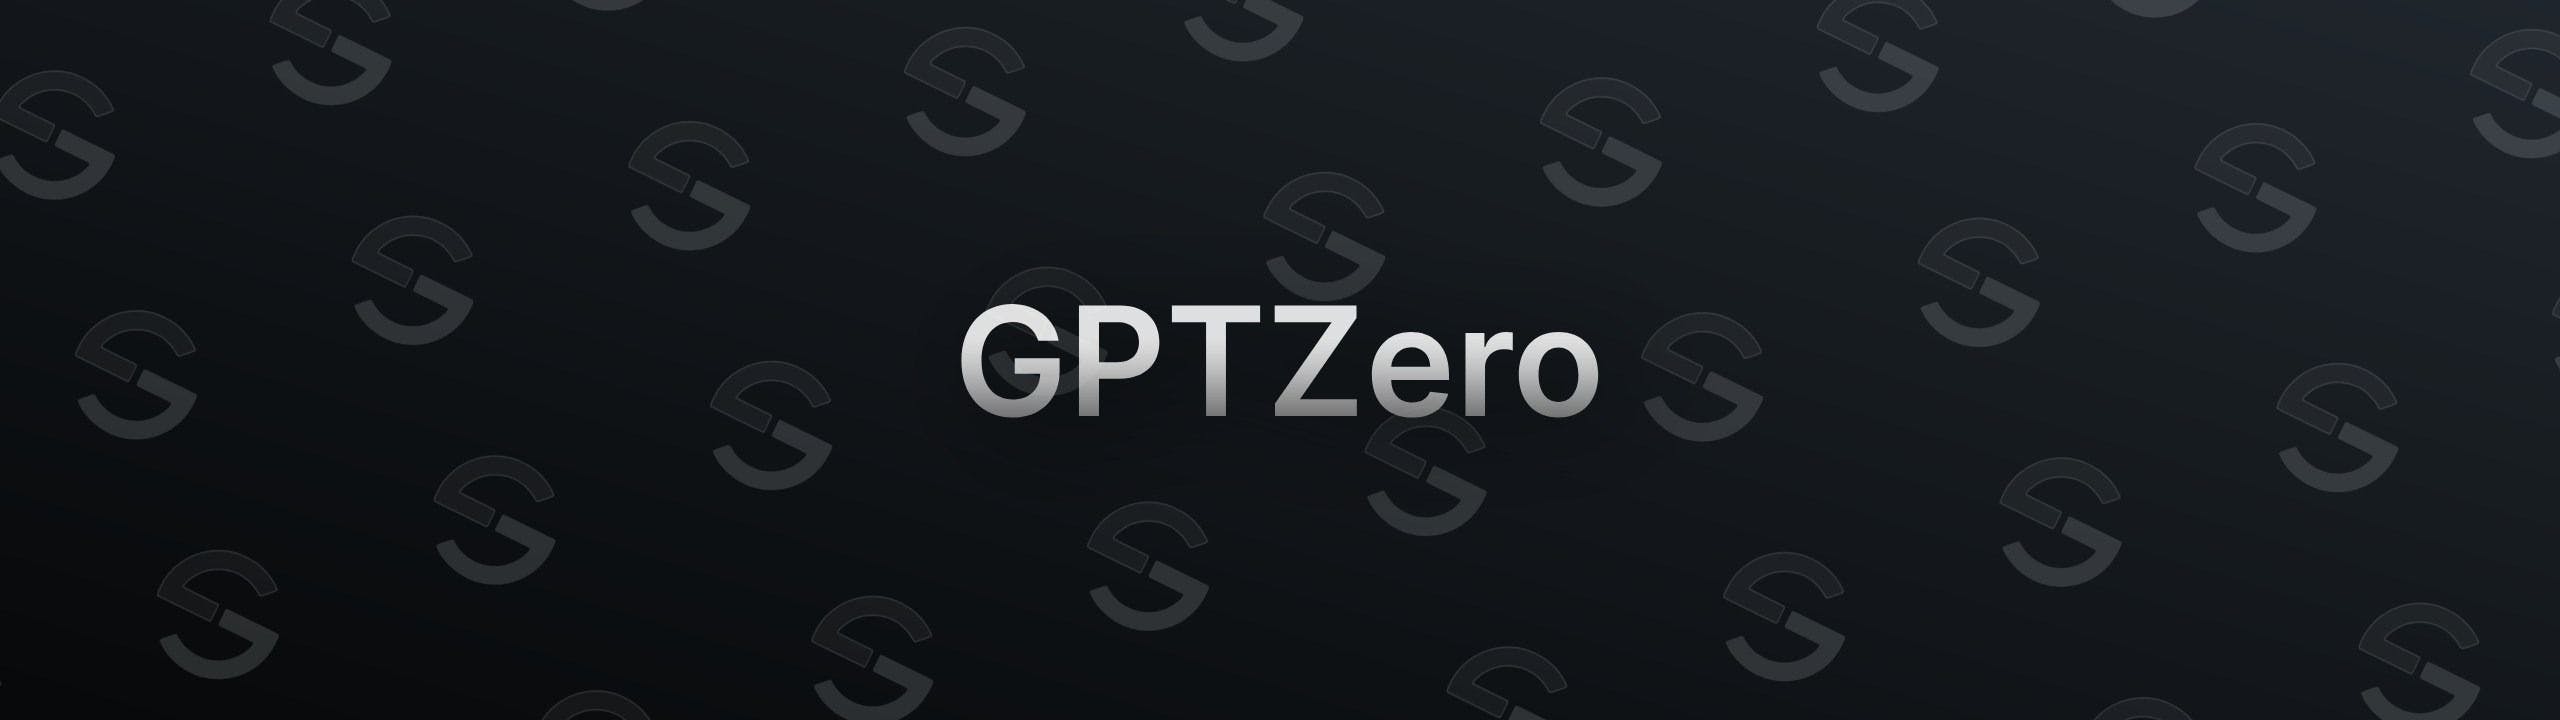 Does Bypass AI Work Against GPTZero? 